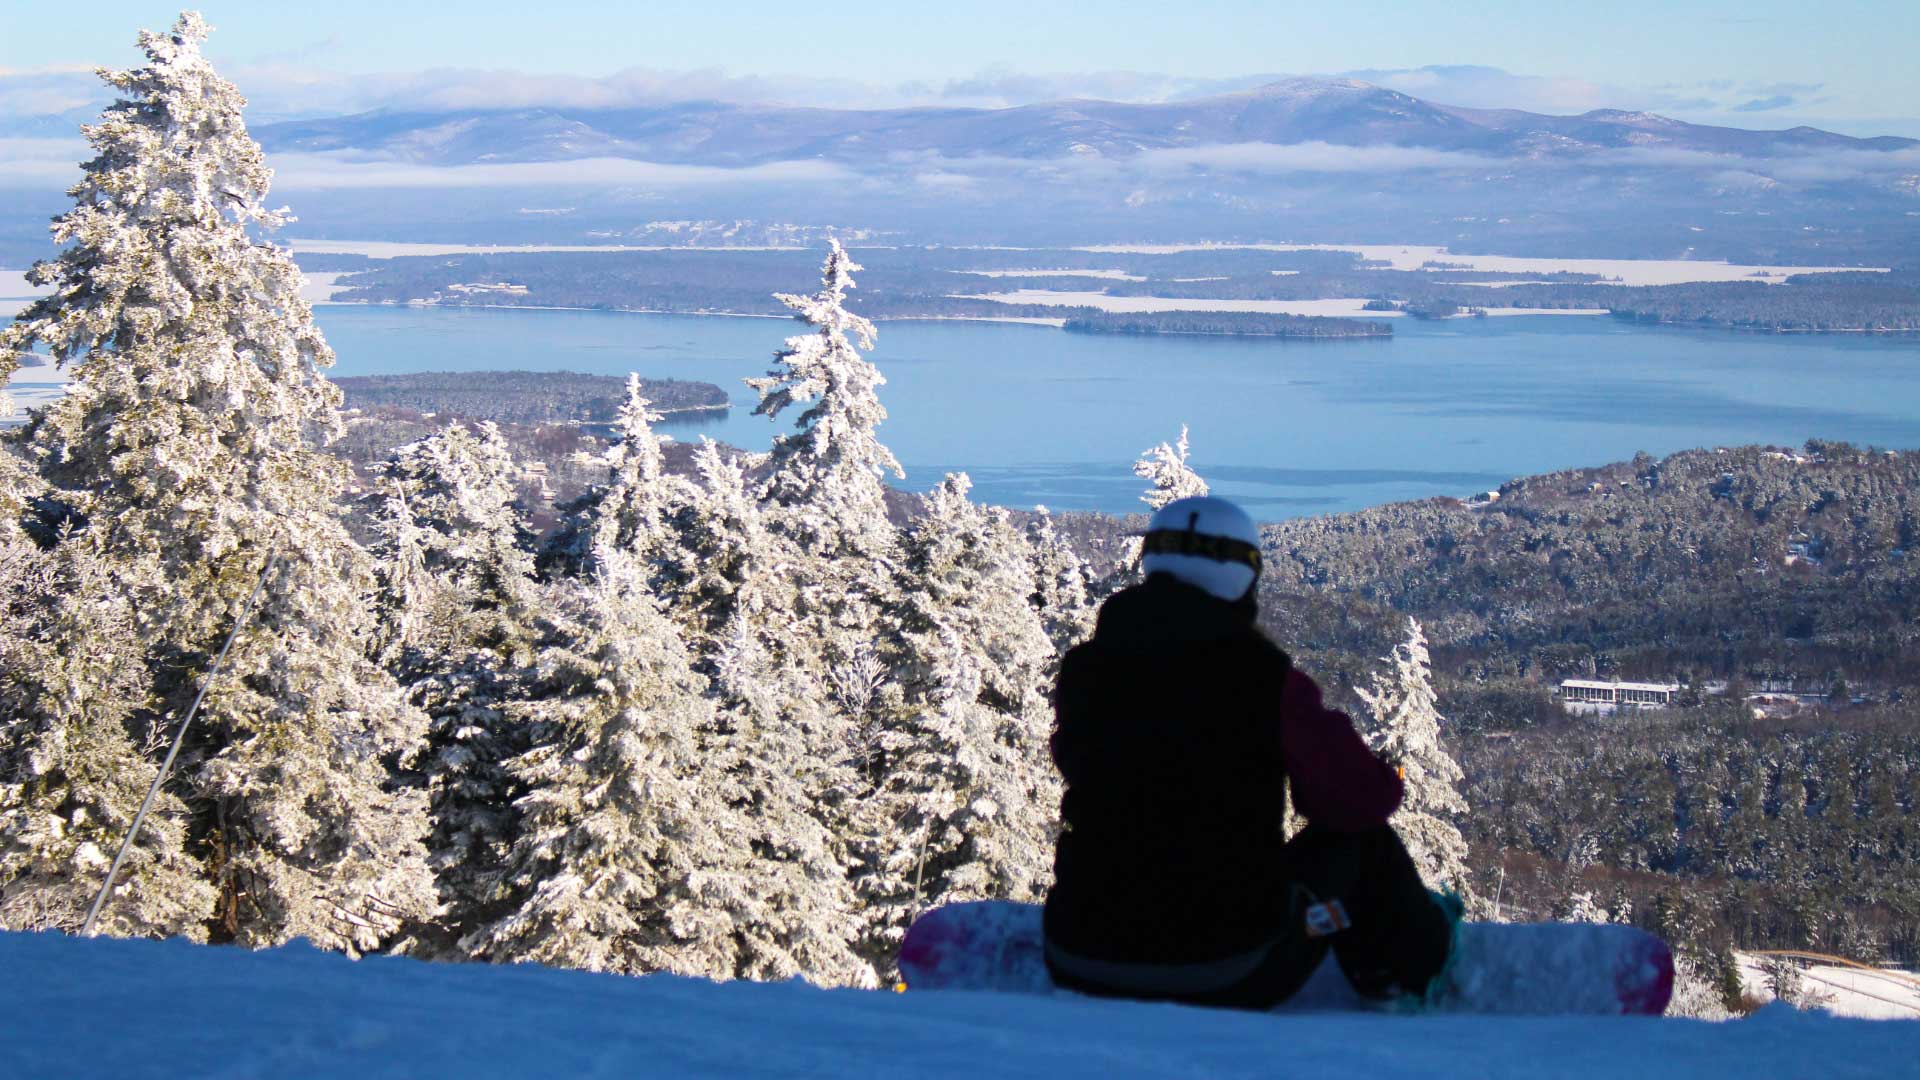 Snowboarder sits on a snowy mountainside overlooking valley, with lake and mountains in the distance